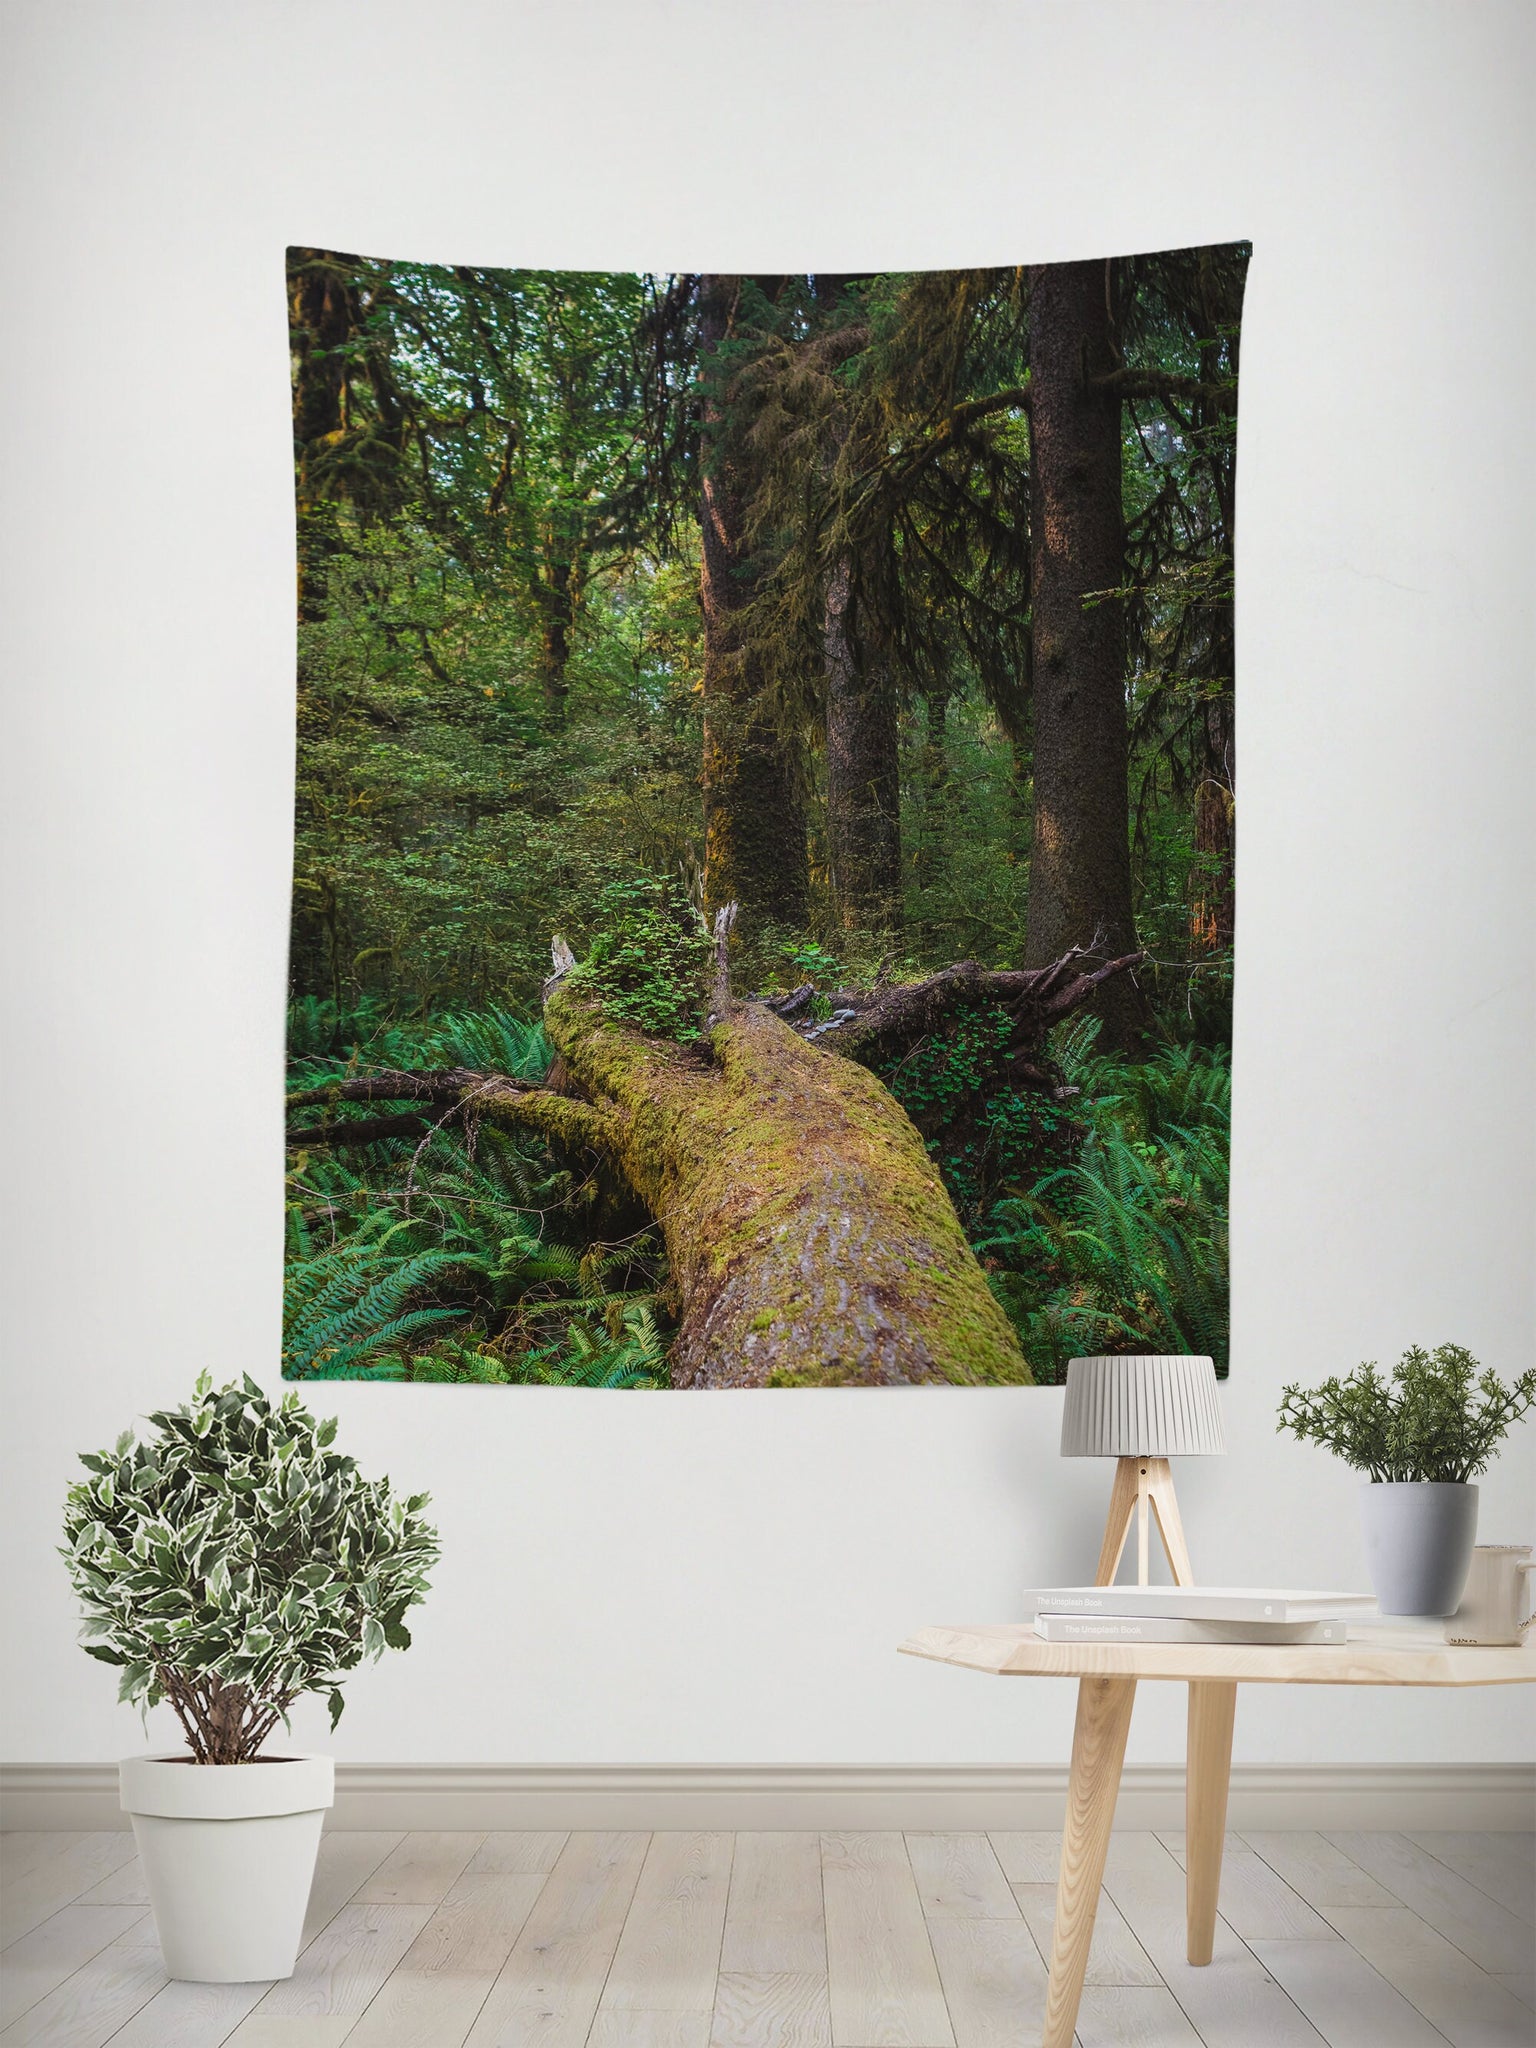 Fallen Tree Olympic Forest Wall Tapestry - Decorative